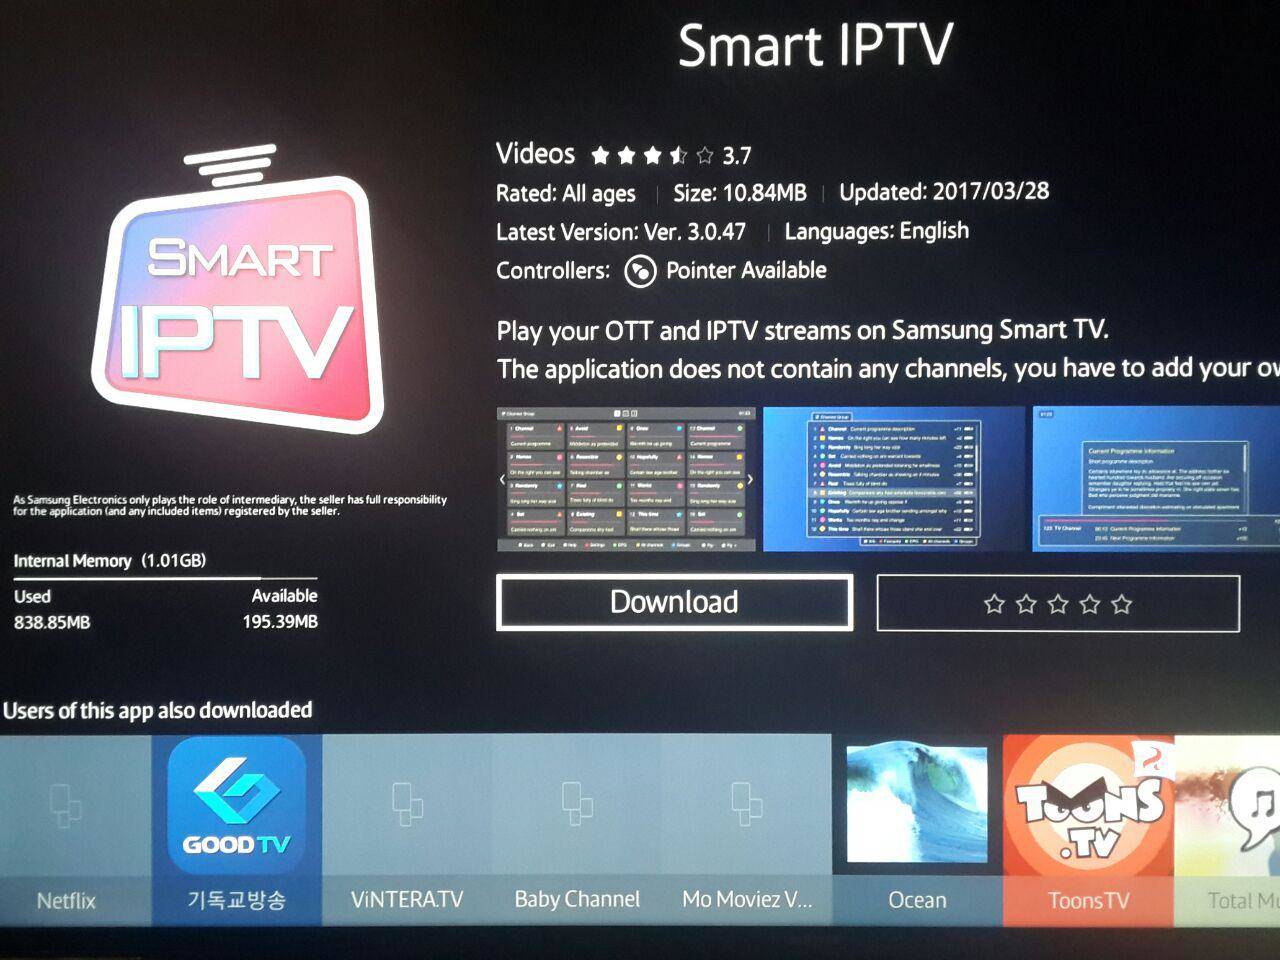 Download Smart IPTV from application store